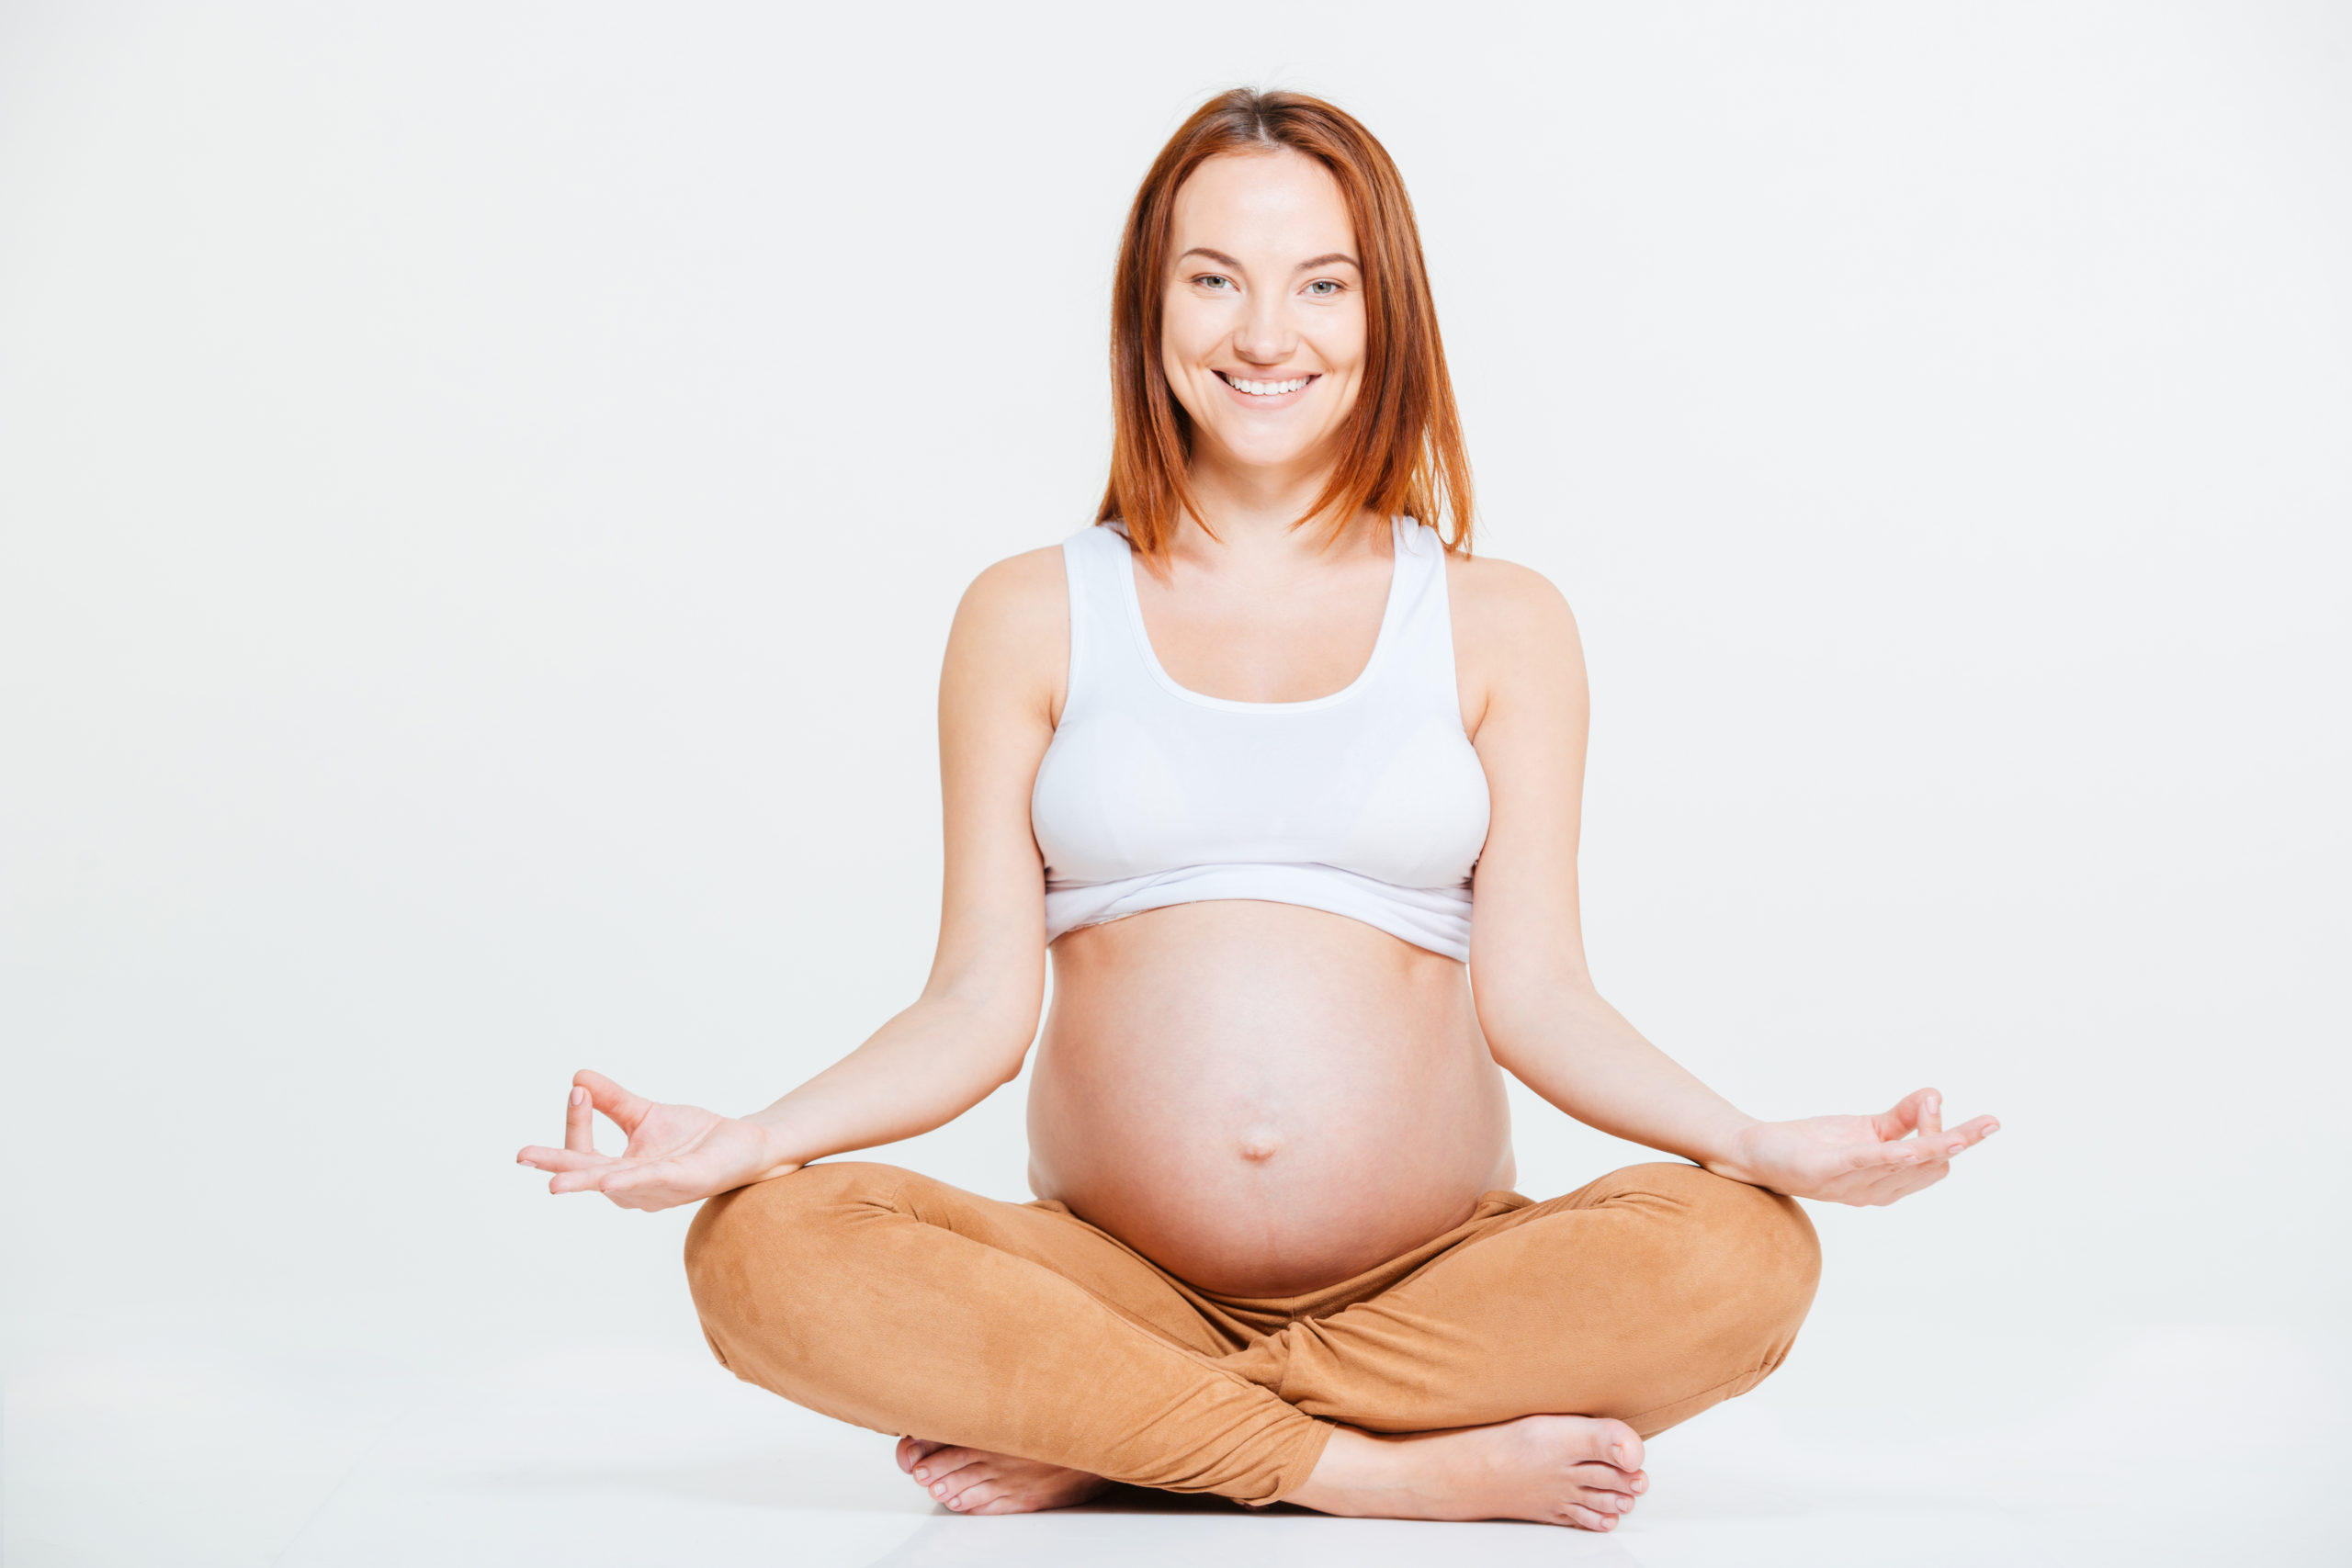 Yoga is a great form of exercise in pregnancy